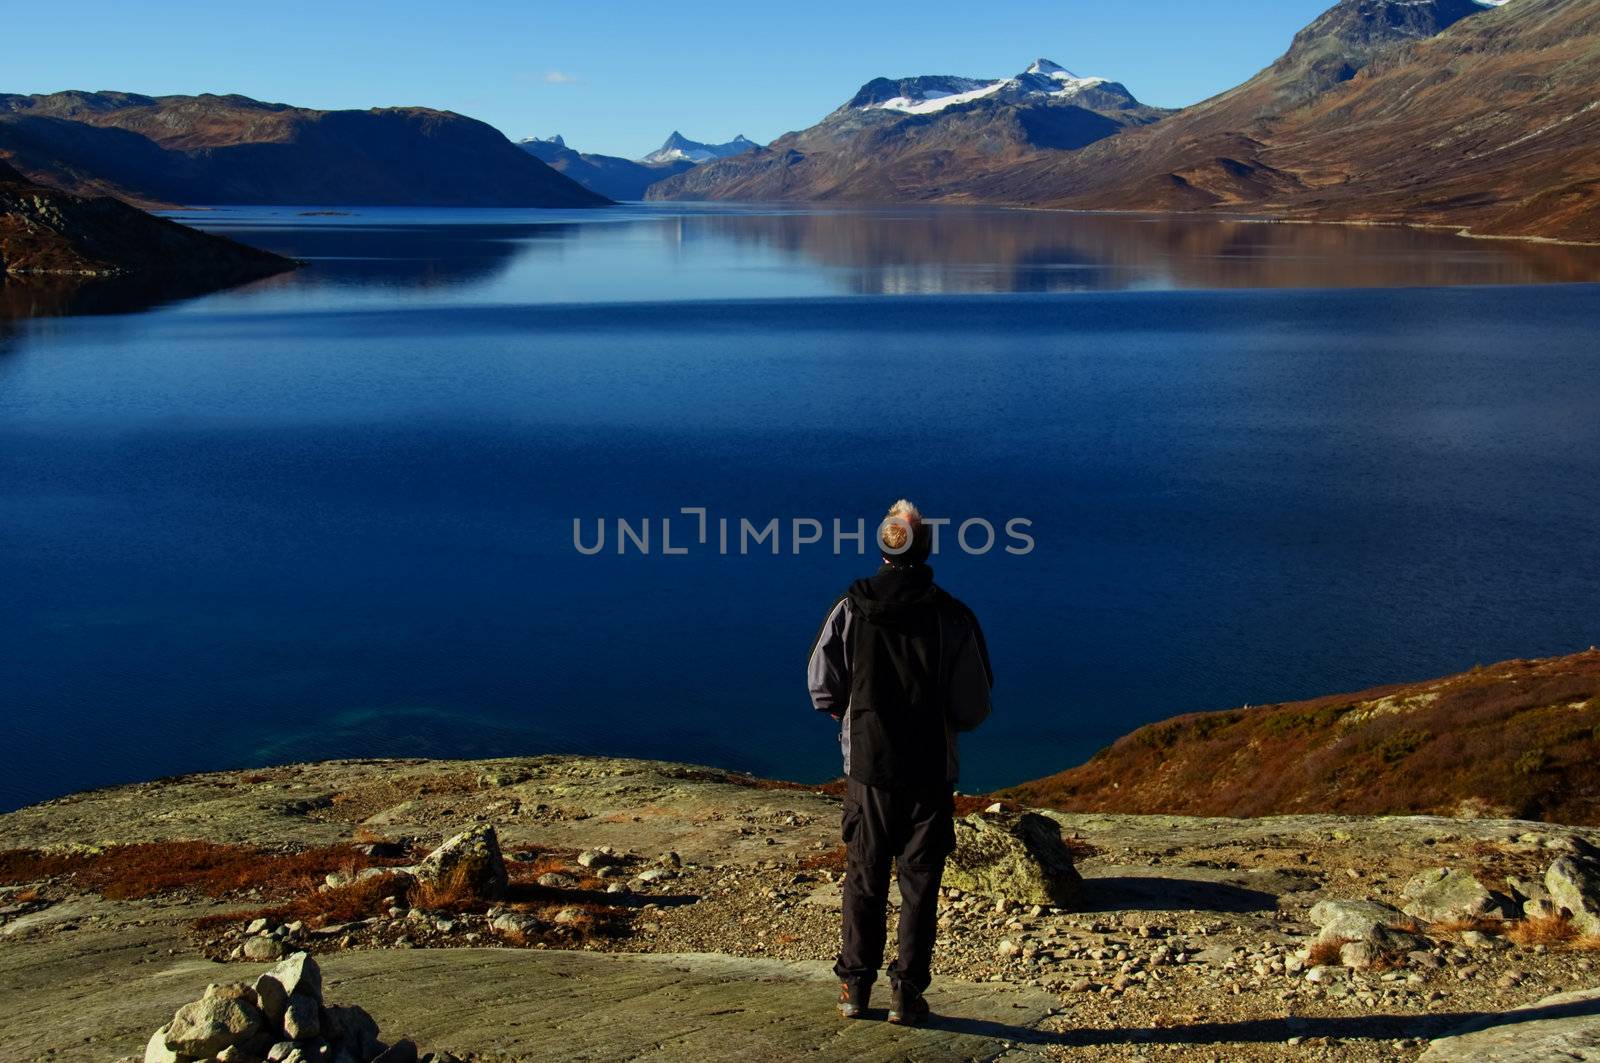 A hiker on top of a mountain with  a view over a lake